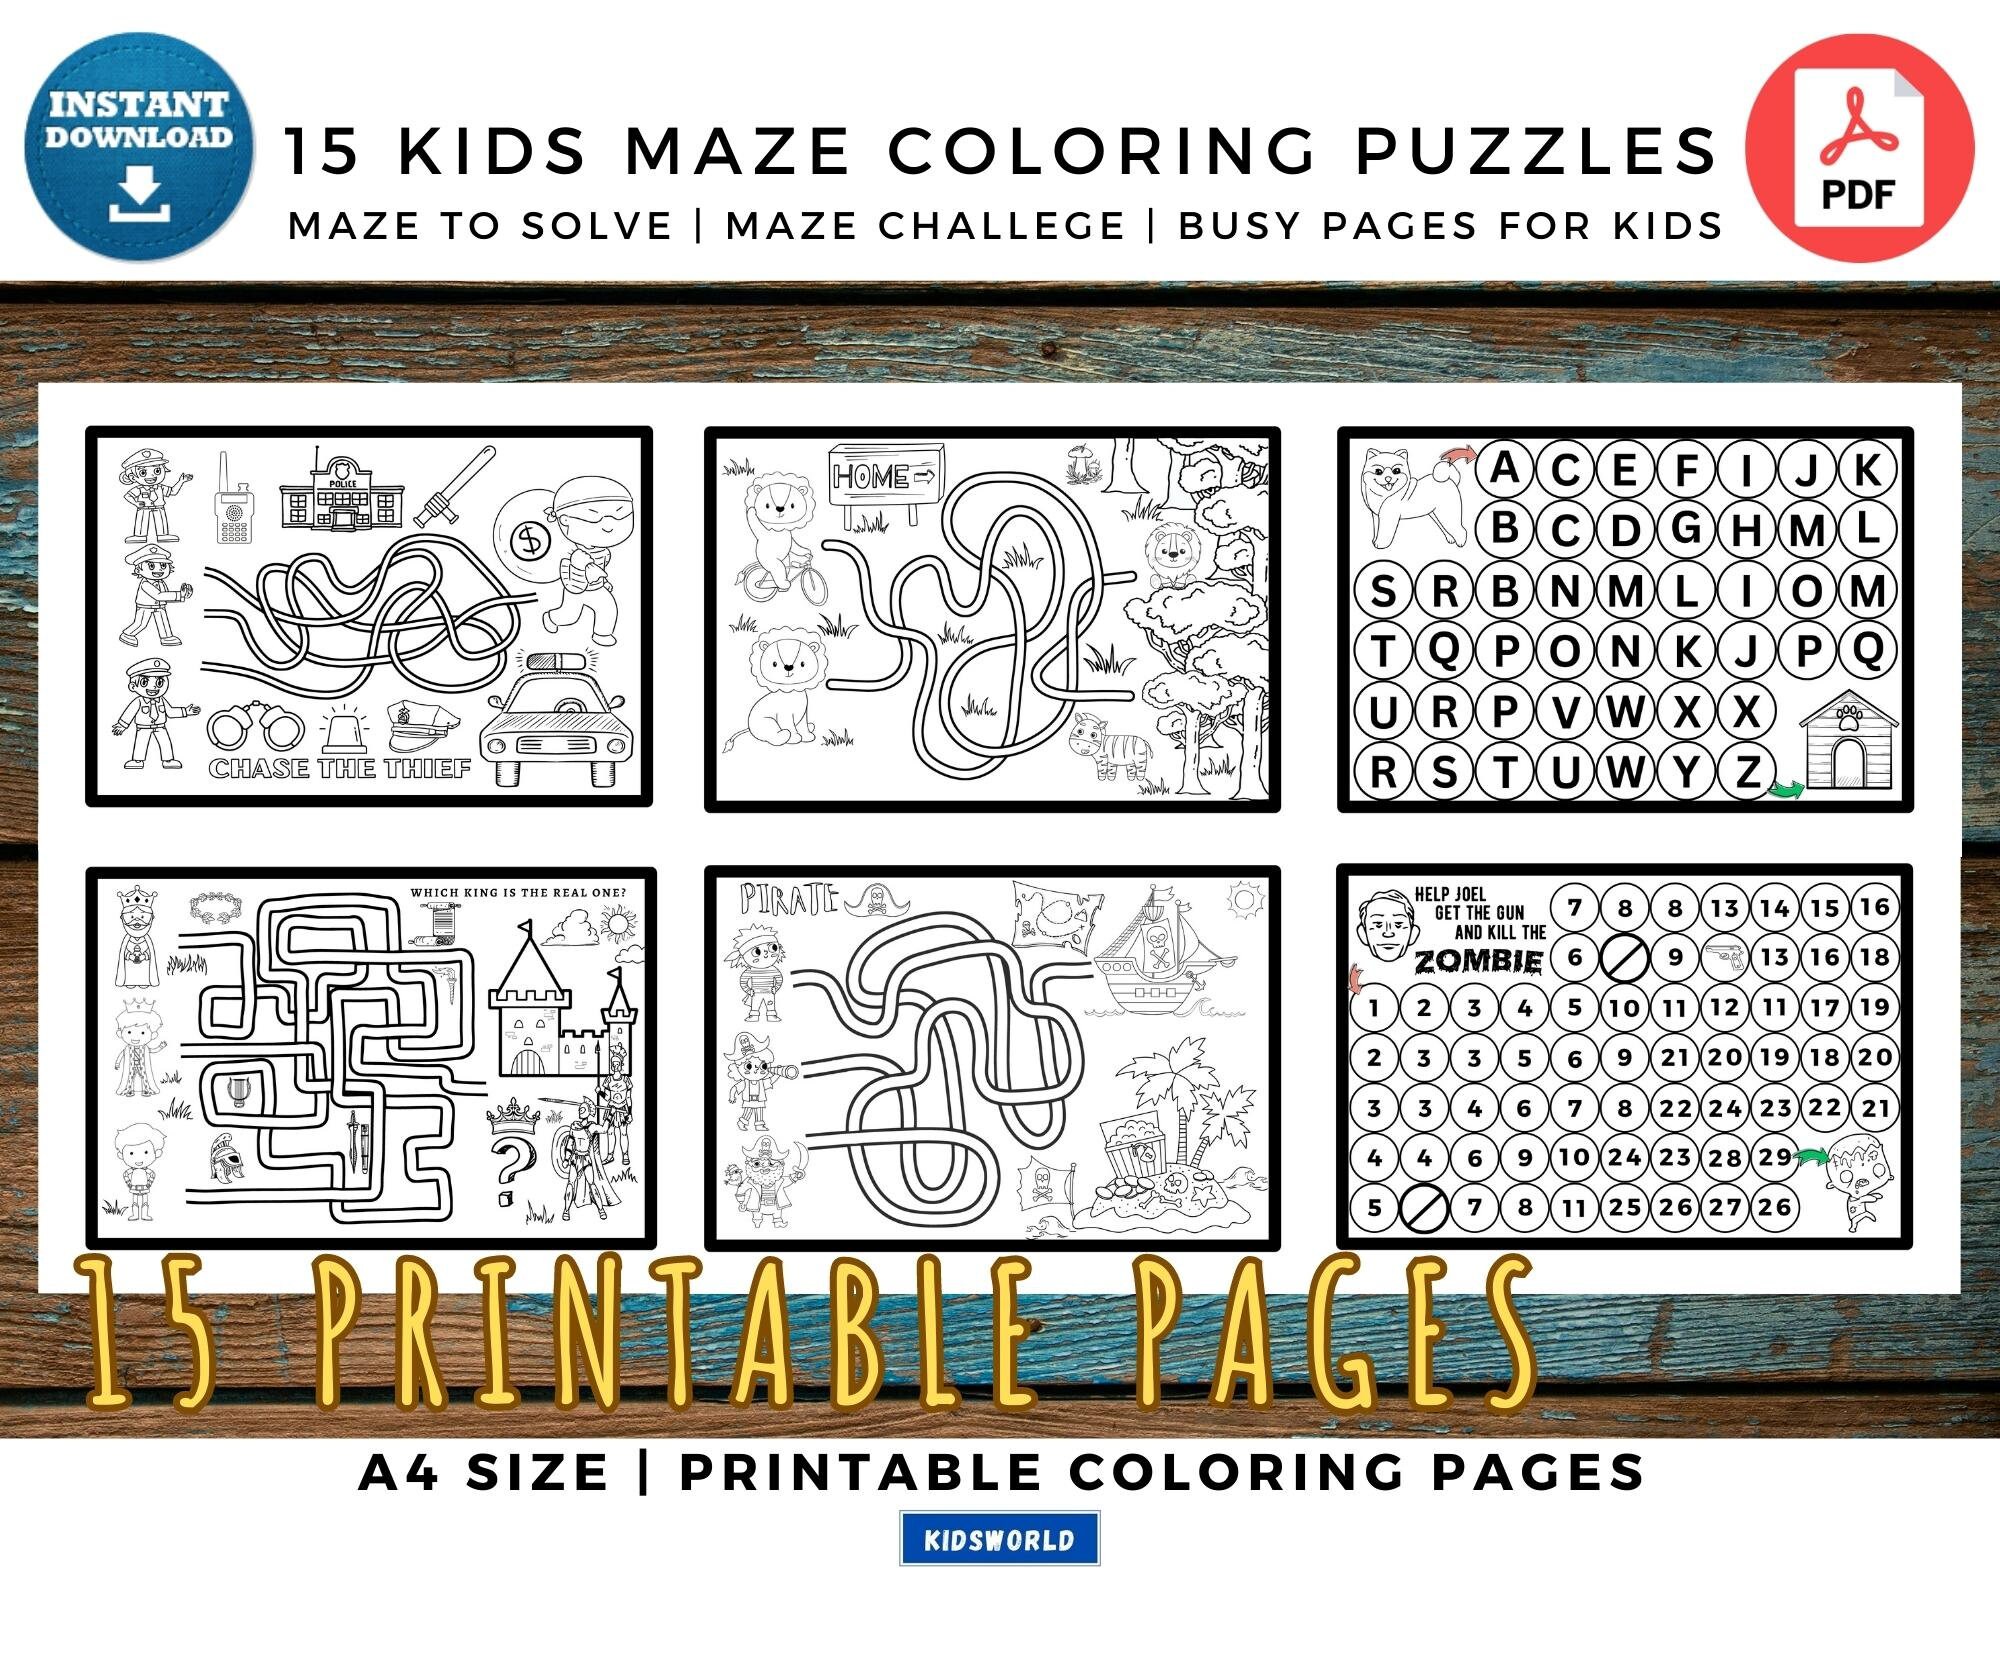 Printable maze challenge coloring pages for kids pages childrens activities busy printable pages for kids maze puzzle digital